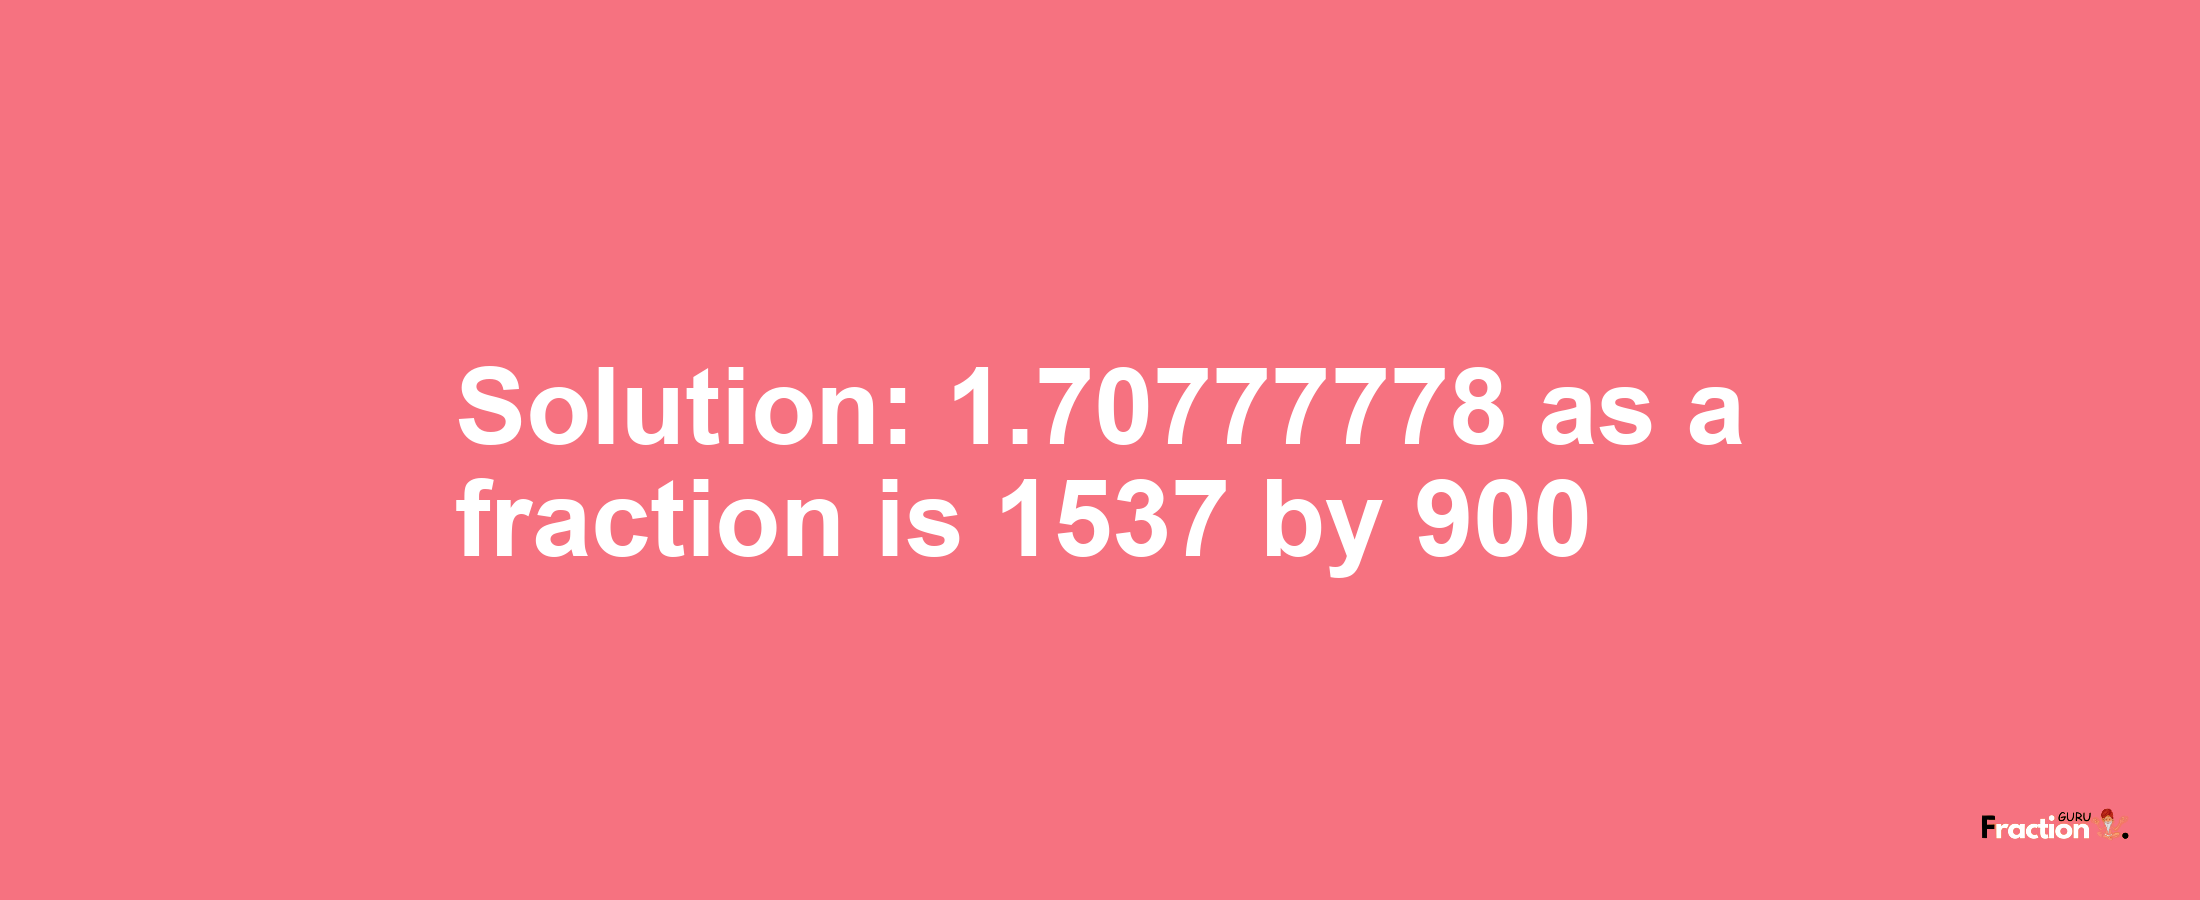 Solution:1.70777778 as a fraction is 1537/900